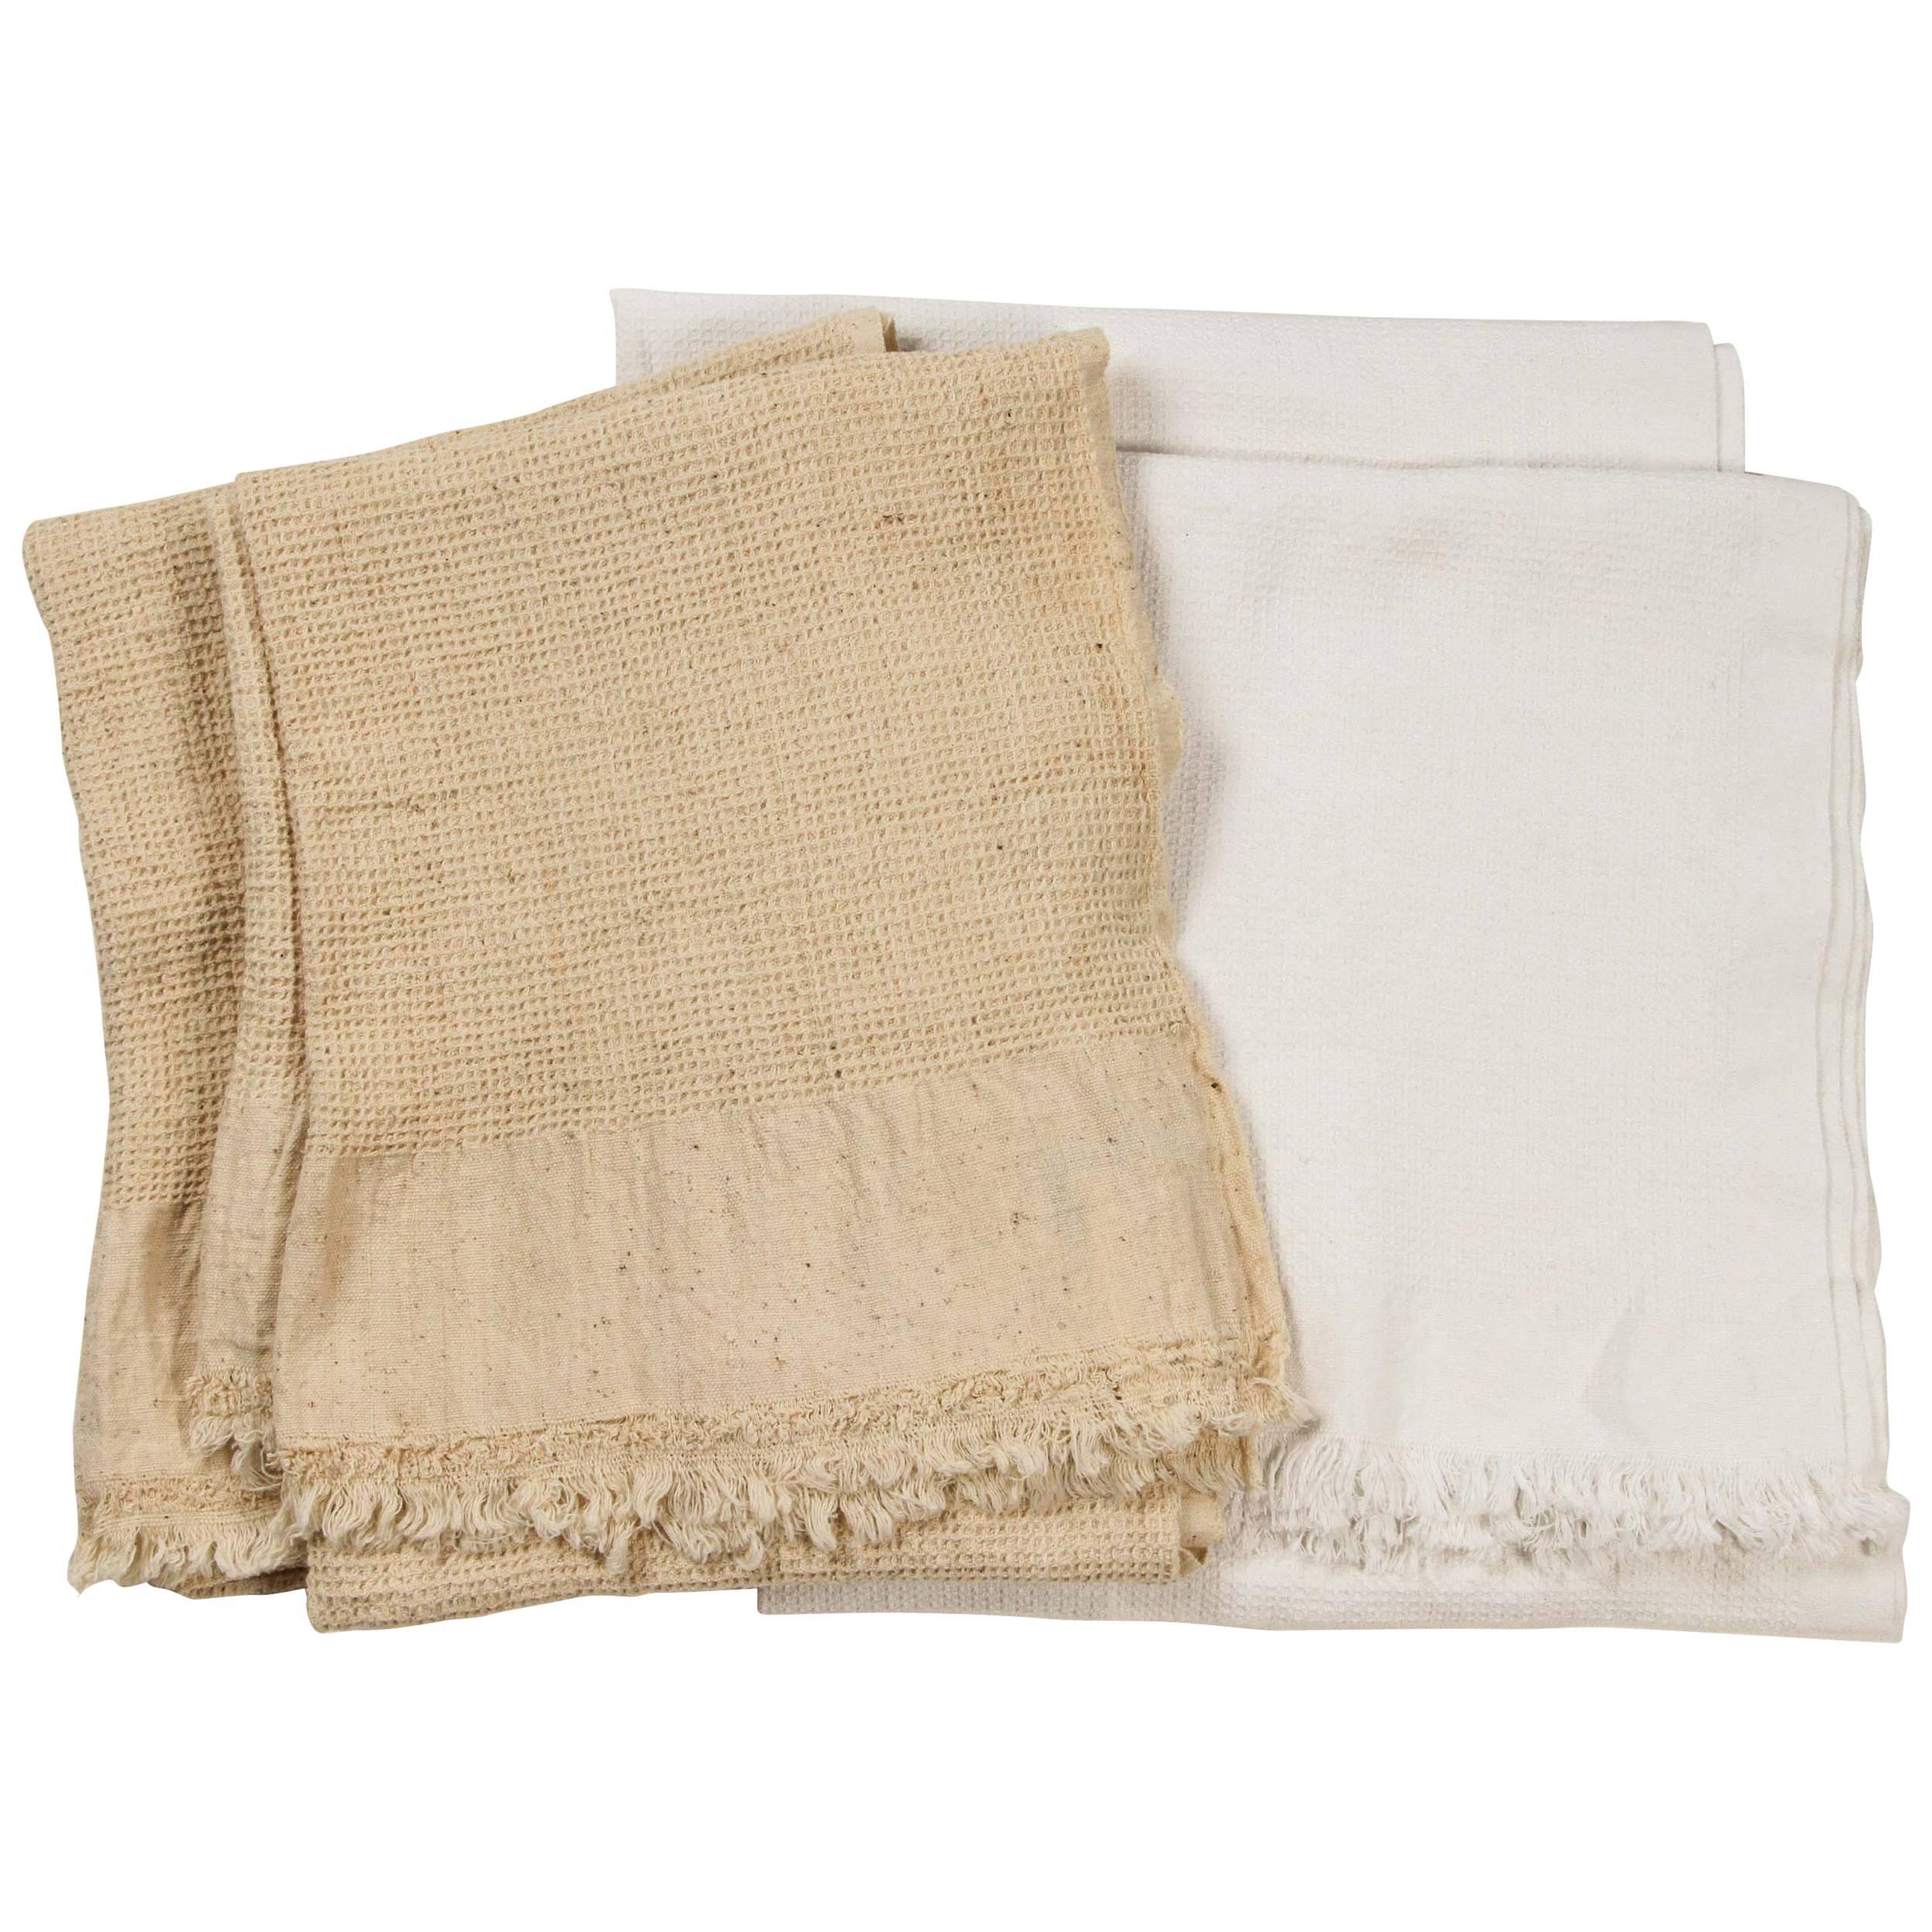 Khadi Textile Waffle Weave Towels   Unbleached and White. For Sale